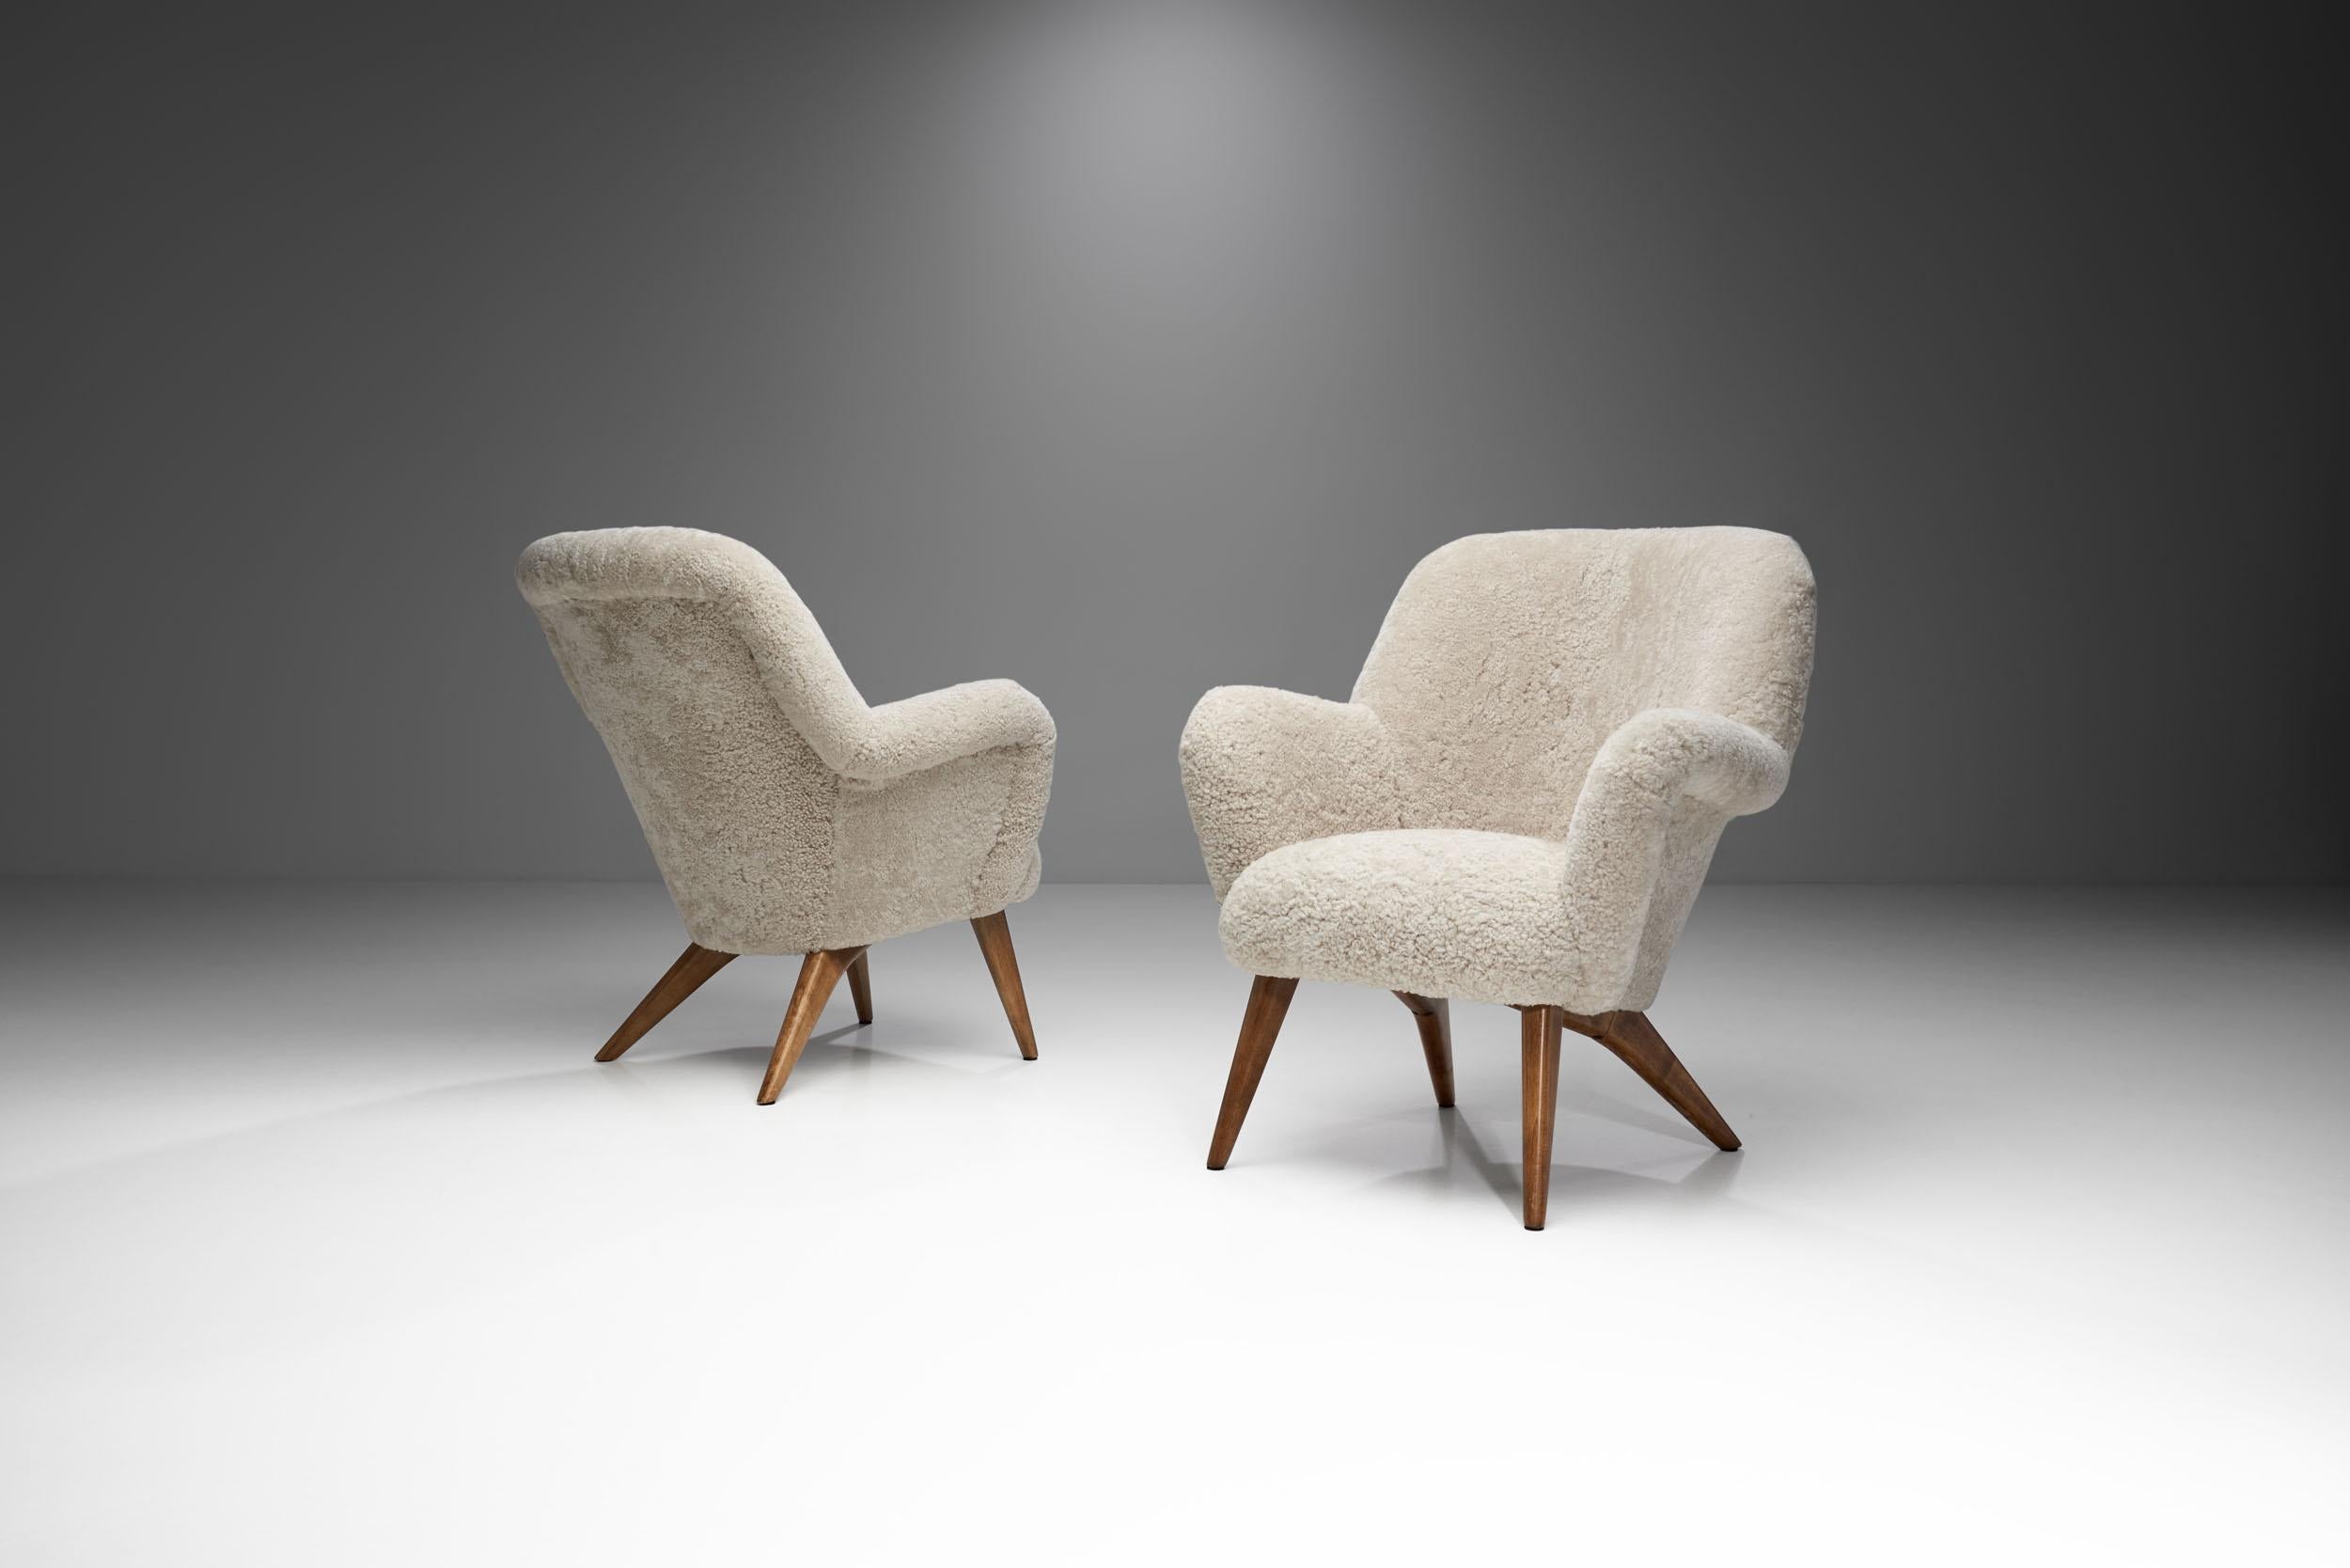 Scandinavian Modern Pair of “Pedro” Armchairs by Carl Gustaf Hiort Af Ornäs, Finland 1950s For Sale